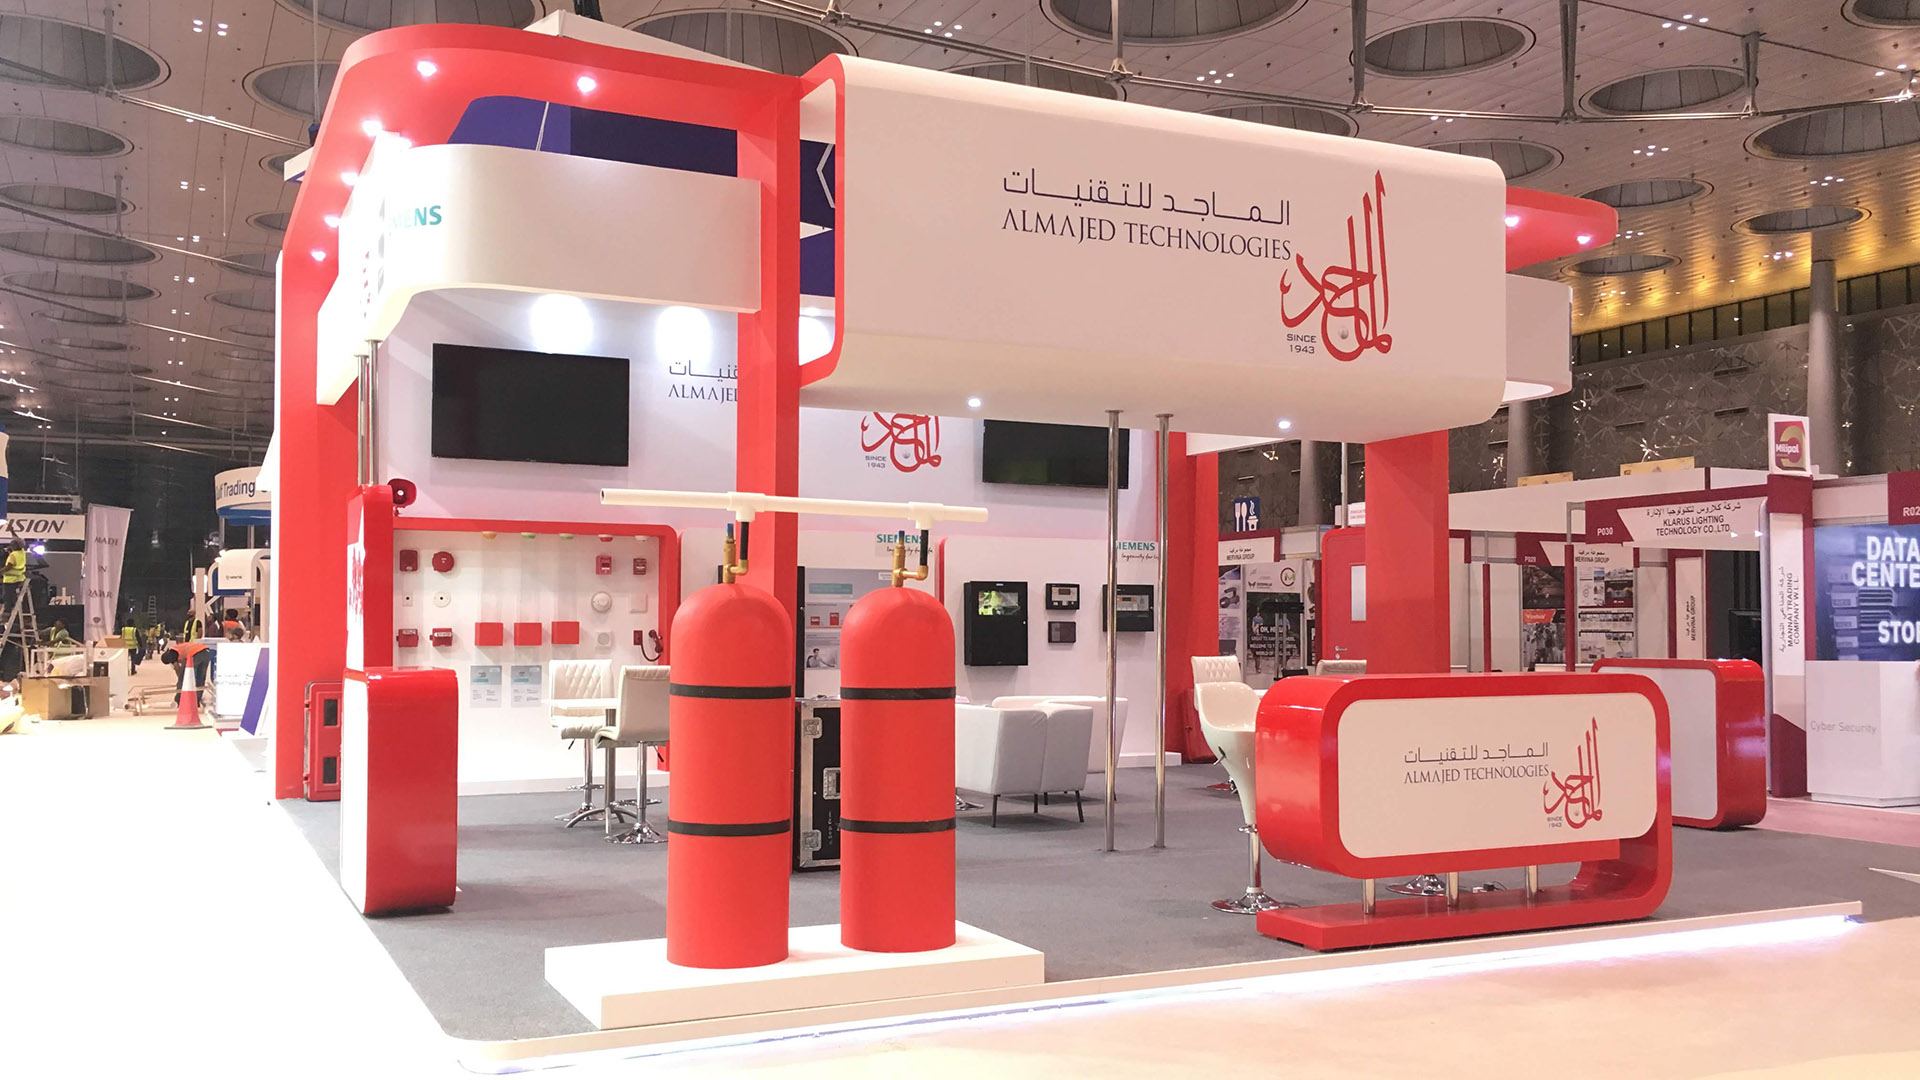 Exhibition Stand for Al Majed Technologies at Milipol 2018 designed, fabricated and installed by ME Visual, Qatar